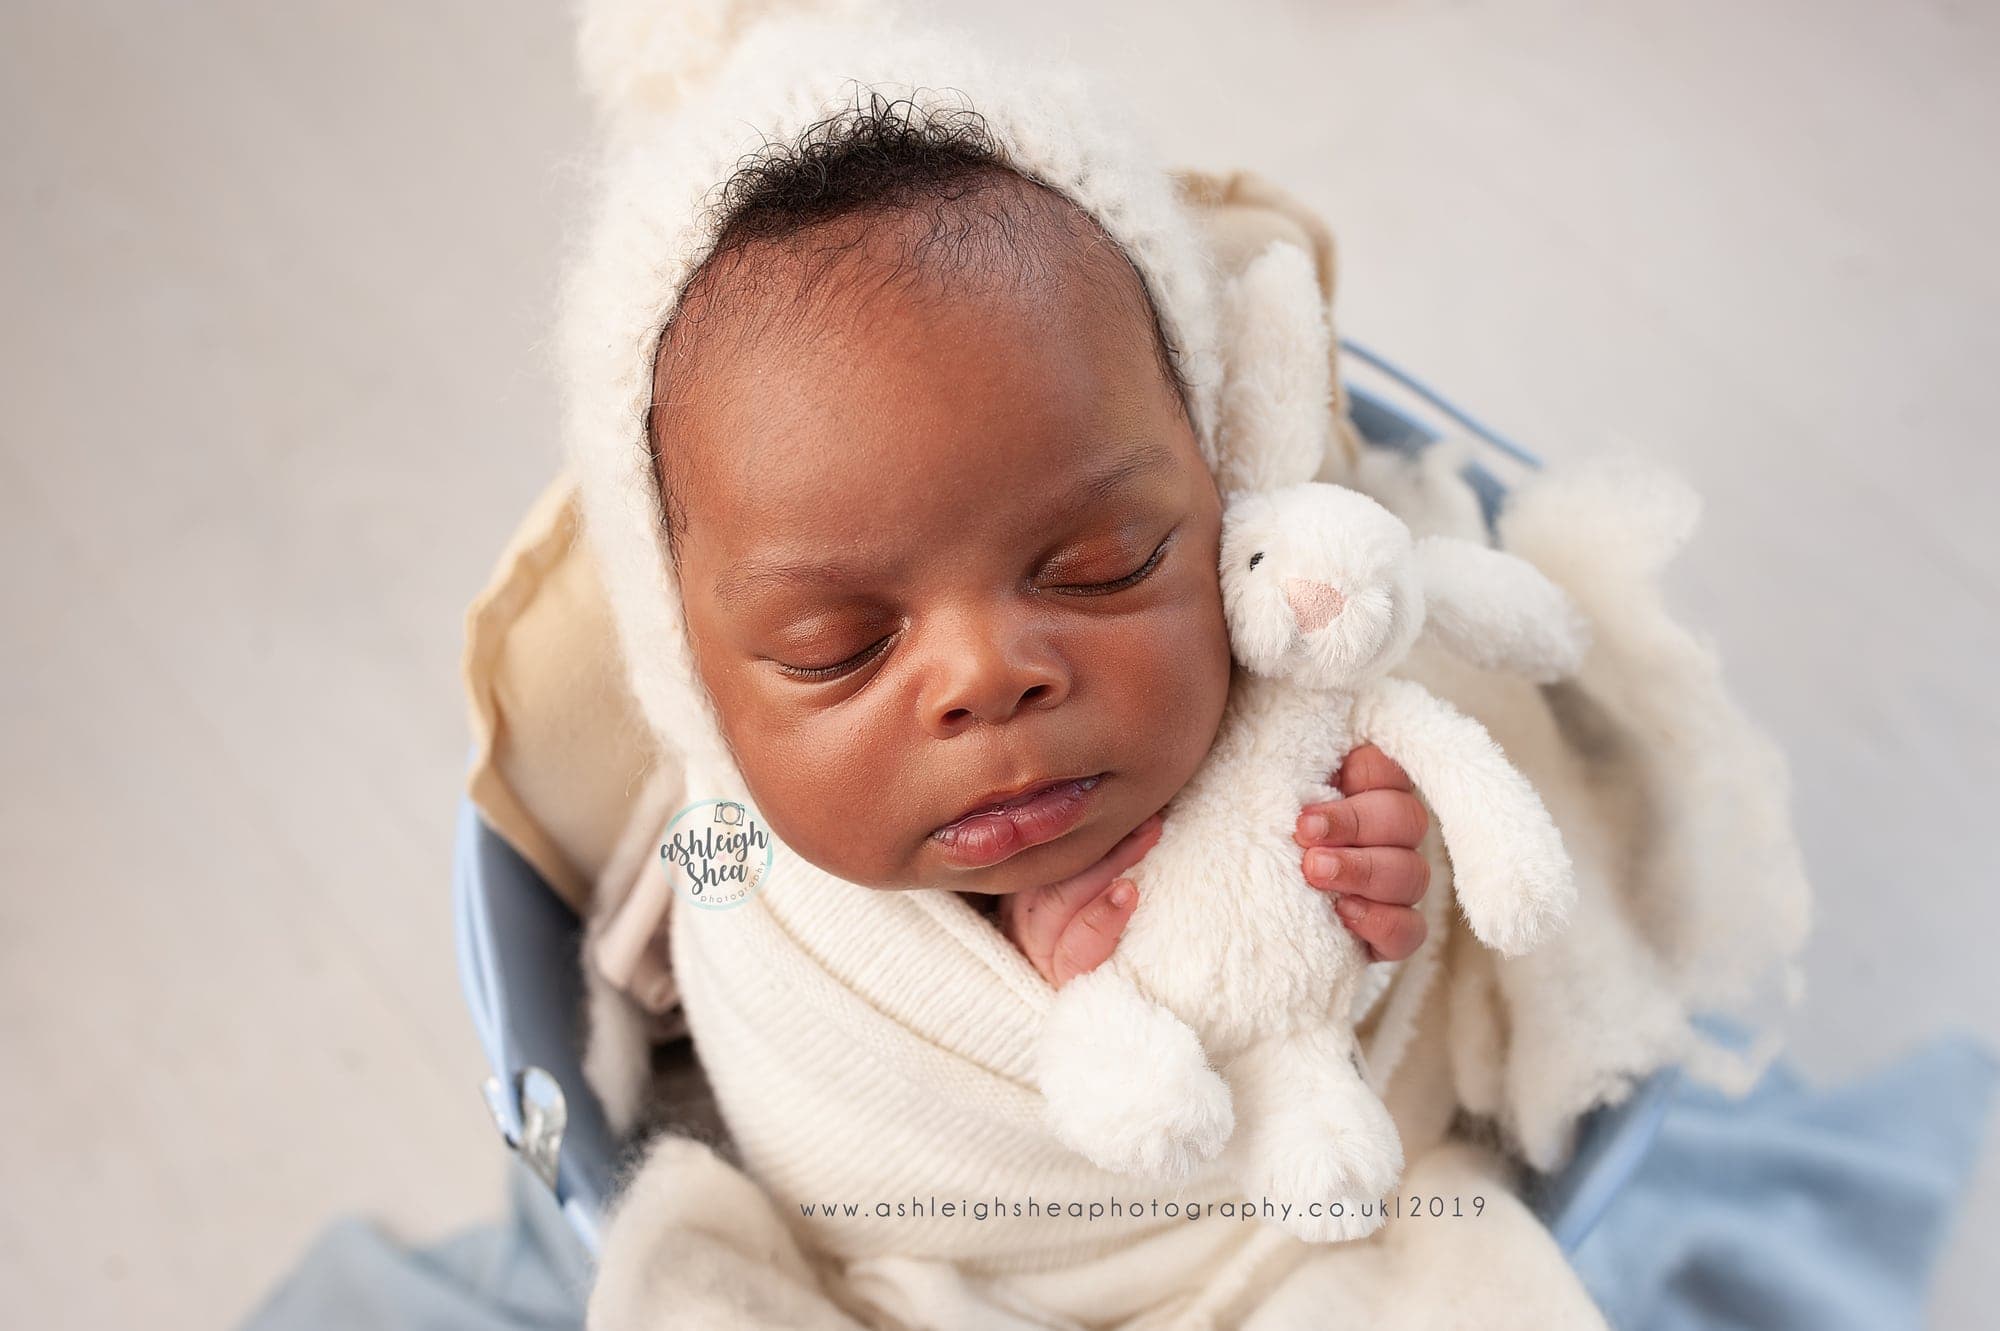 Sleeping baby during a newborn photography session at Ashleigh Shea Photography